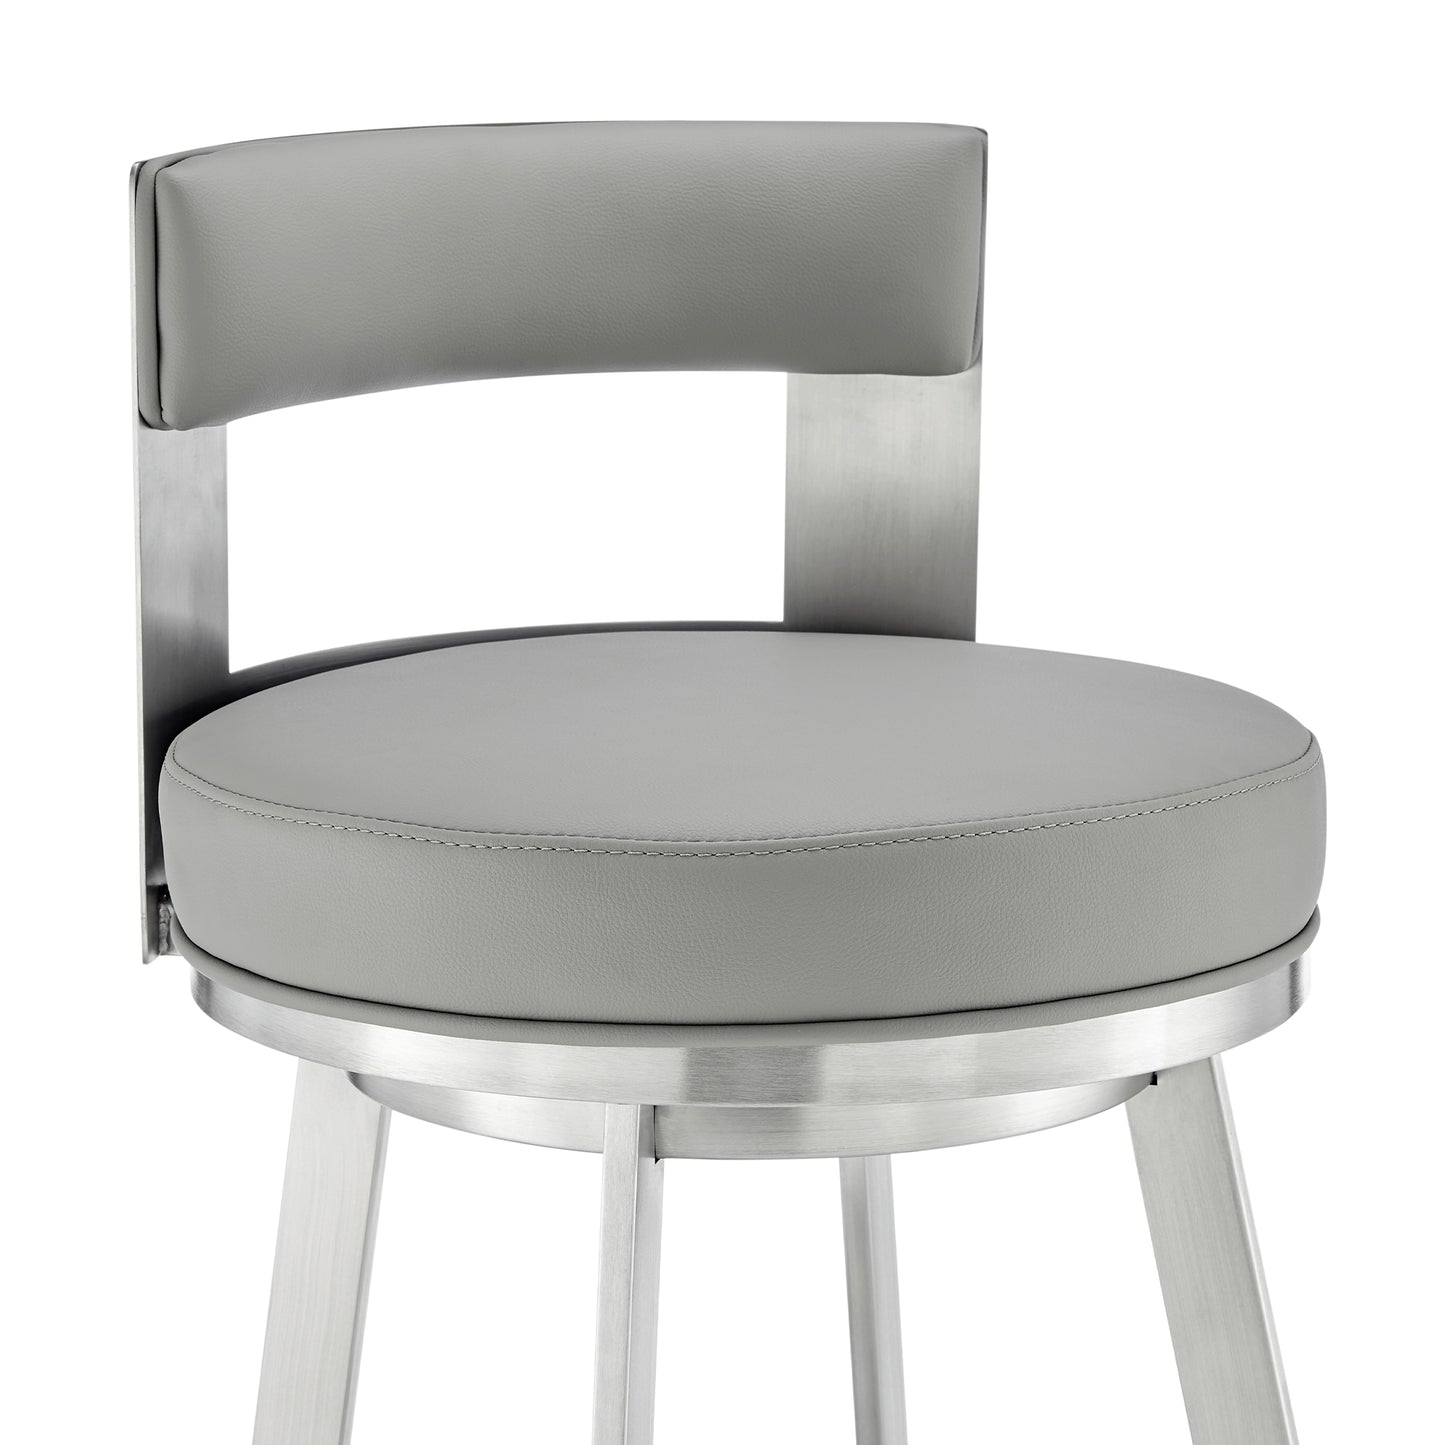 Flynn 26" Swivel Counter Stool in Brushed Stainless Steel with Light Gray Faux Leather